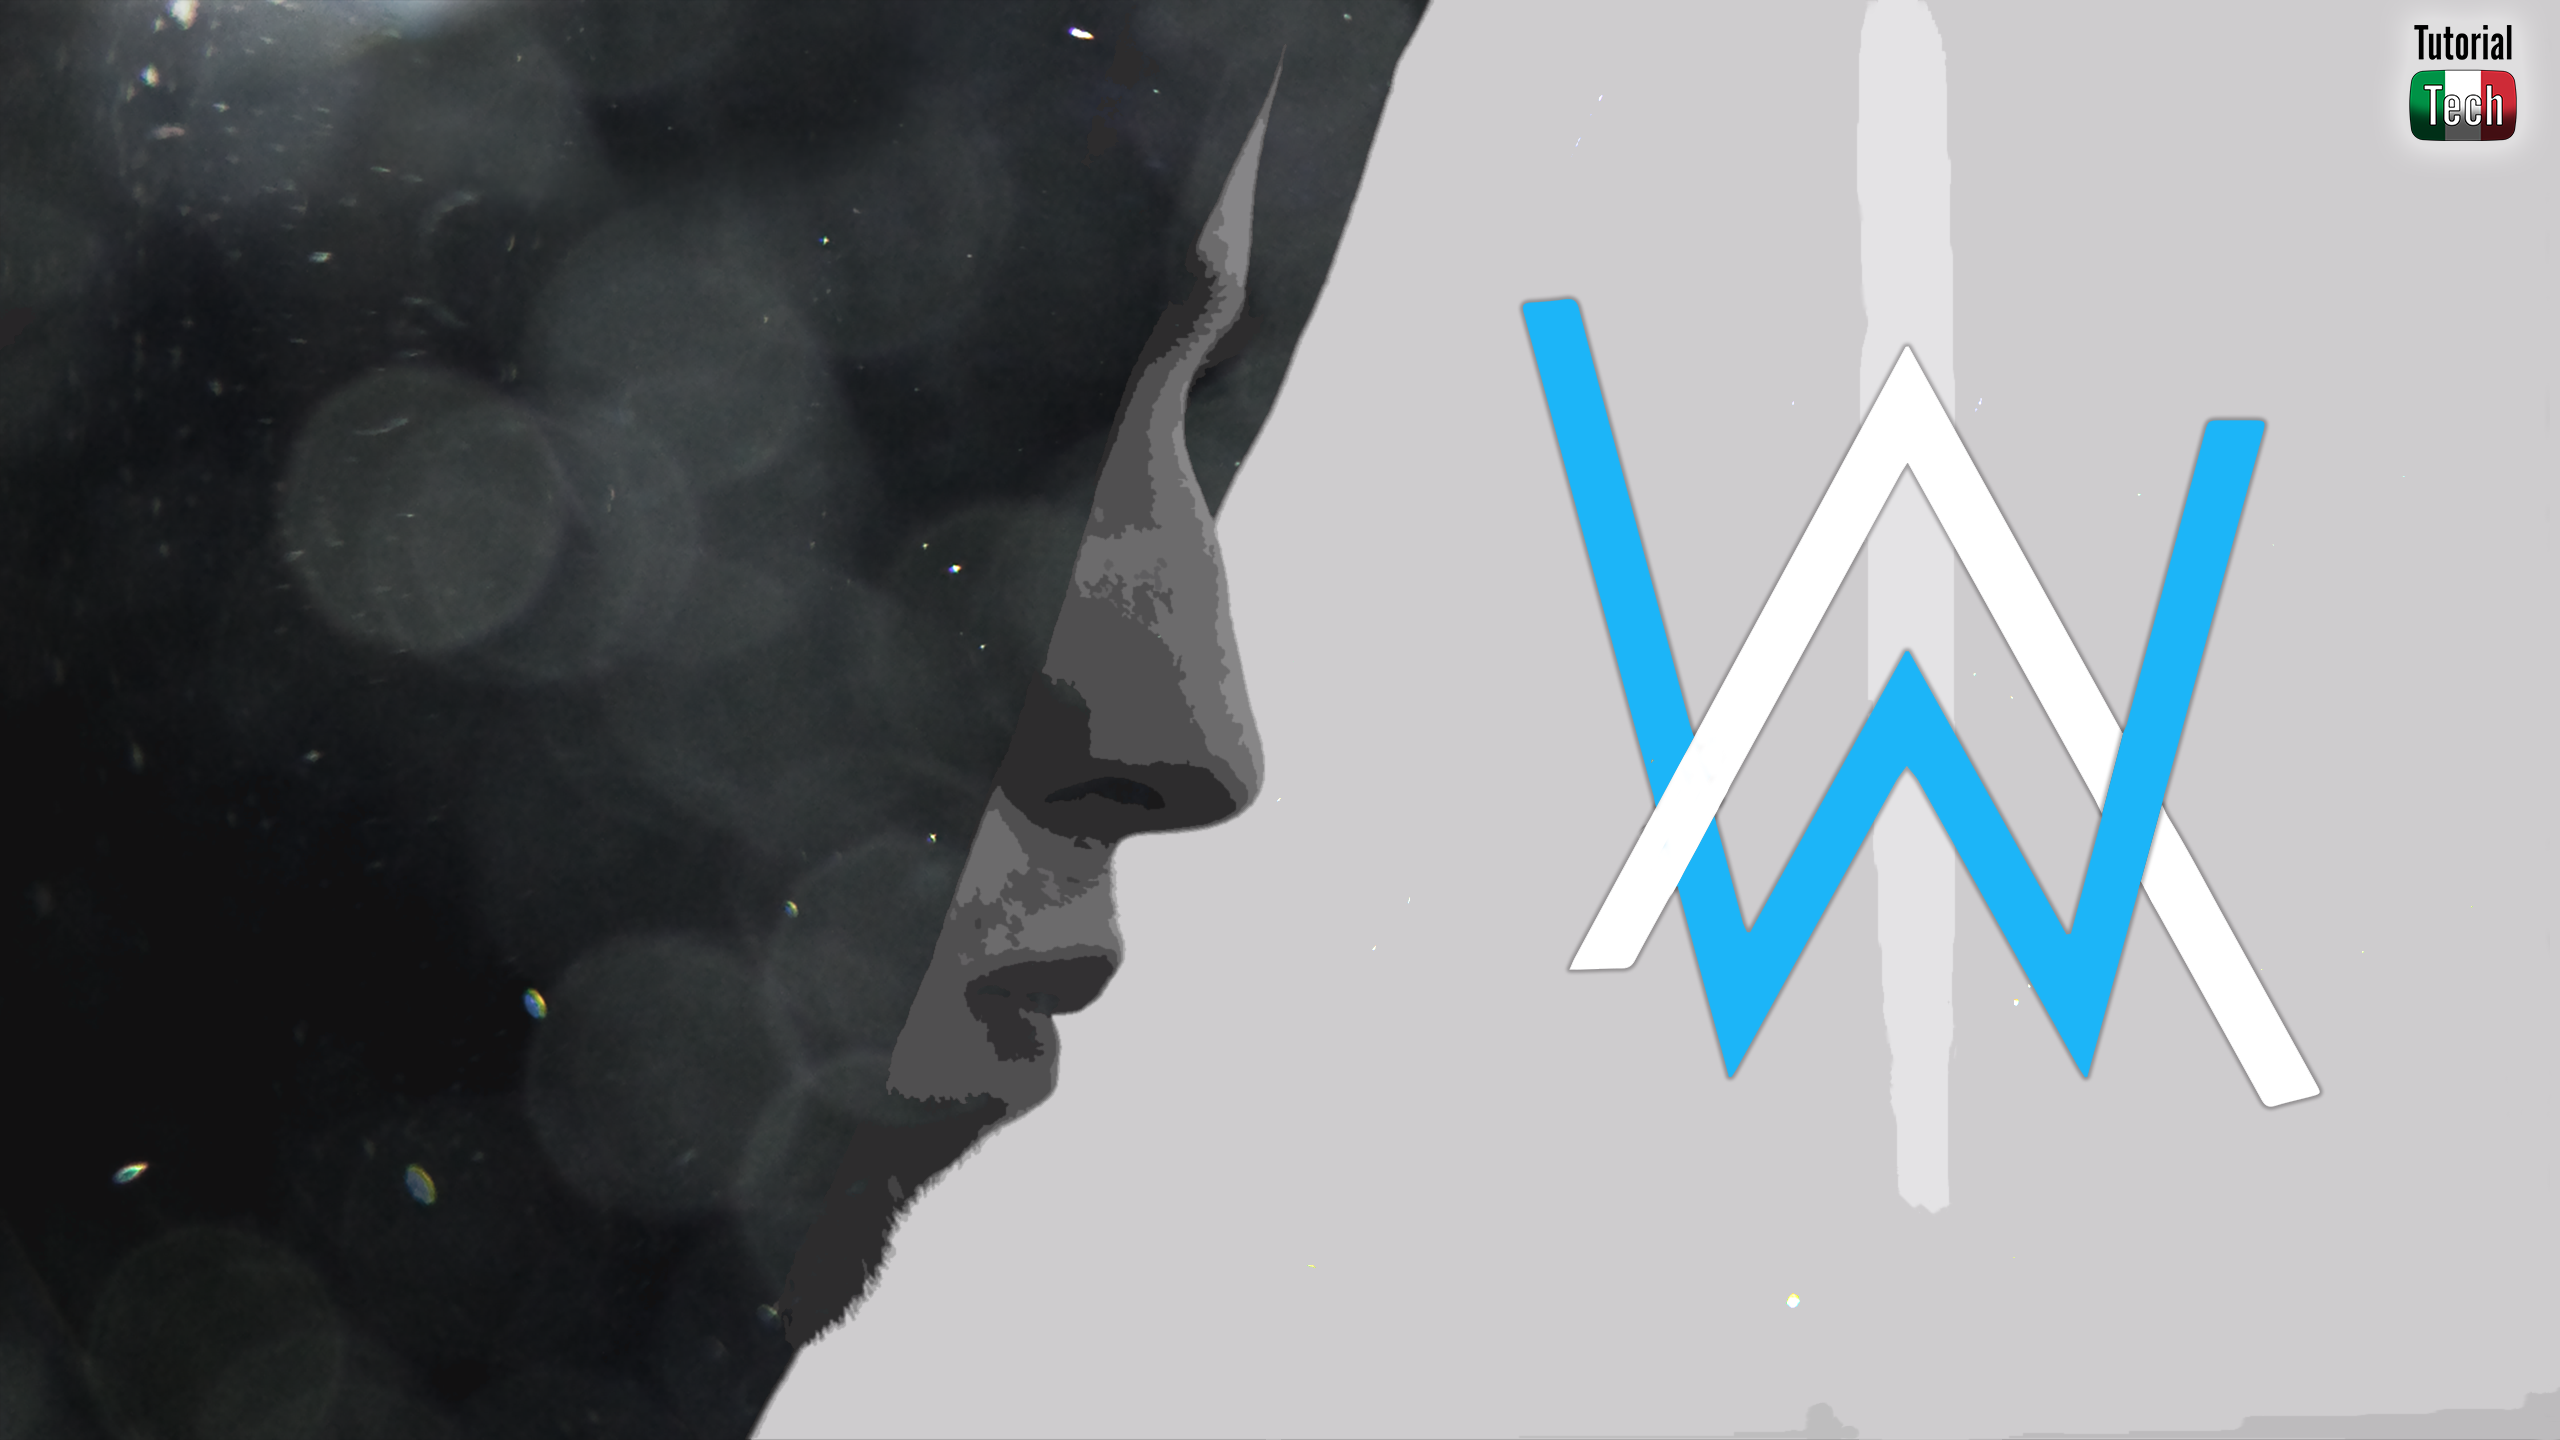 Alan Walker Wallpapers Images Photos Pictures Backgrounds 2560x1440